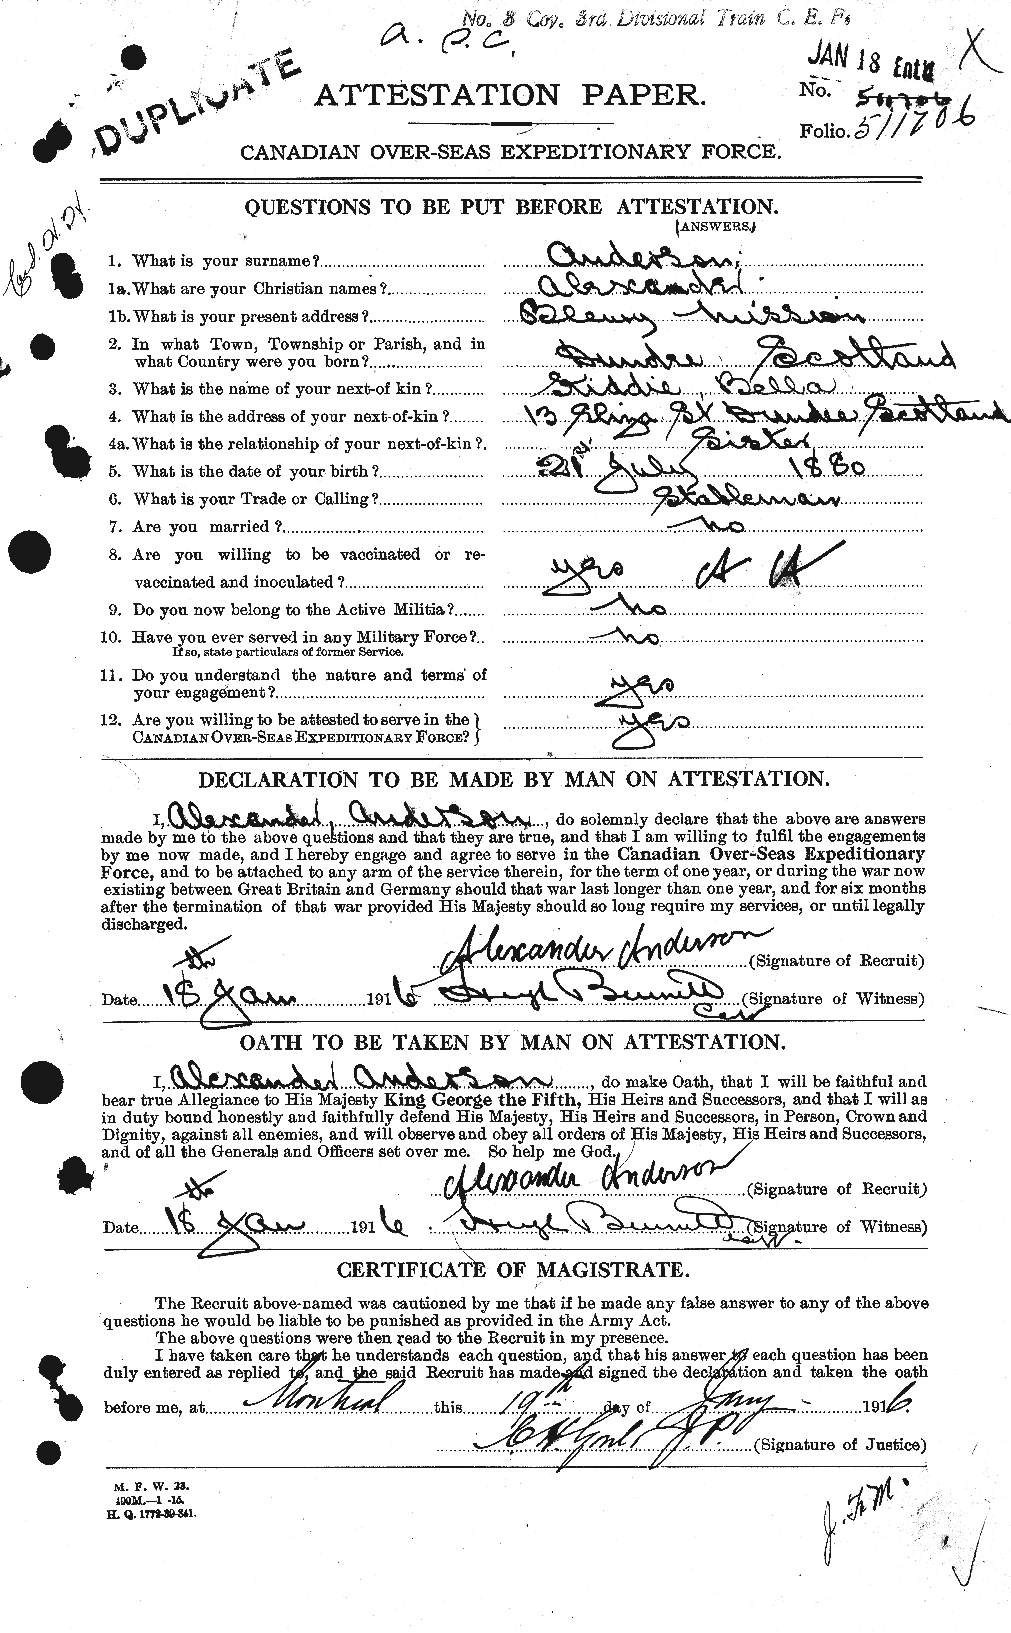 Personnel Records of the First World War - CEF 209500a